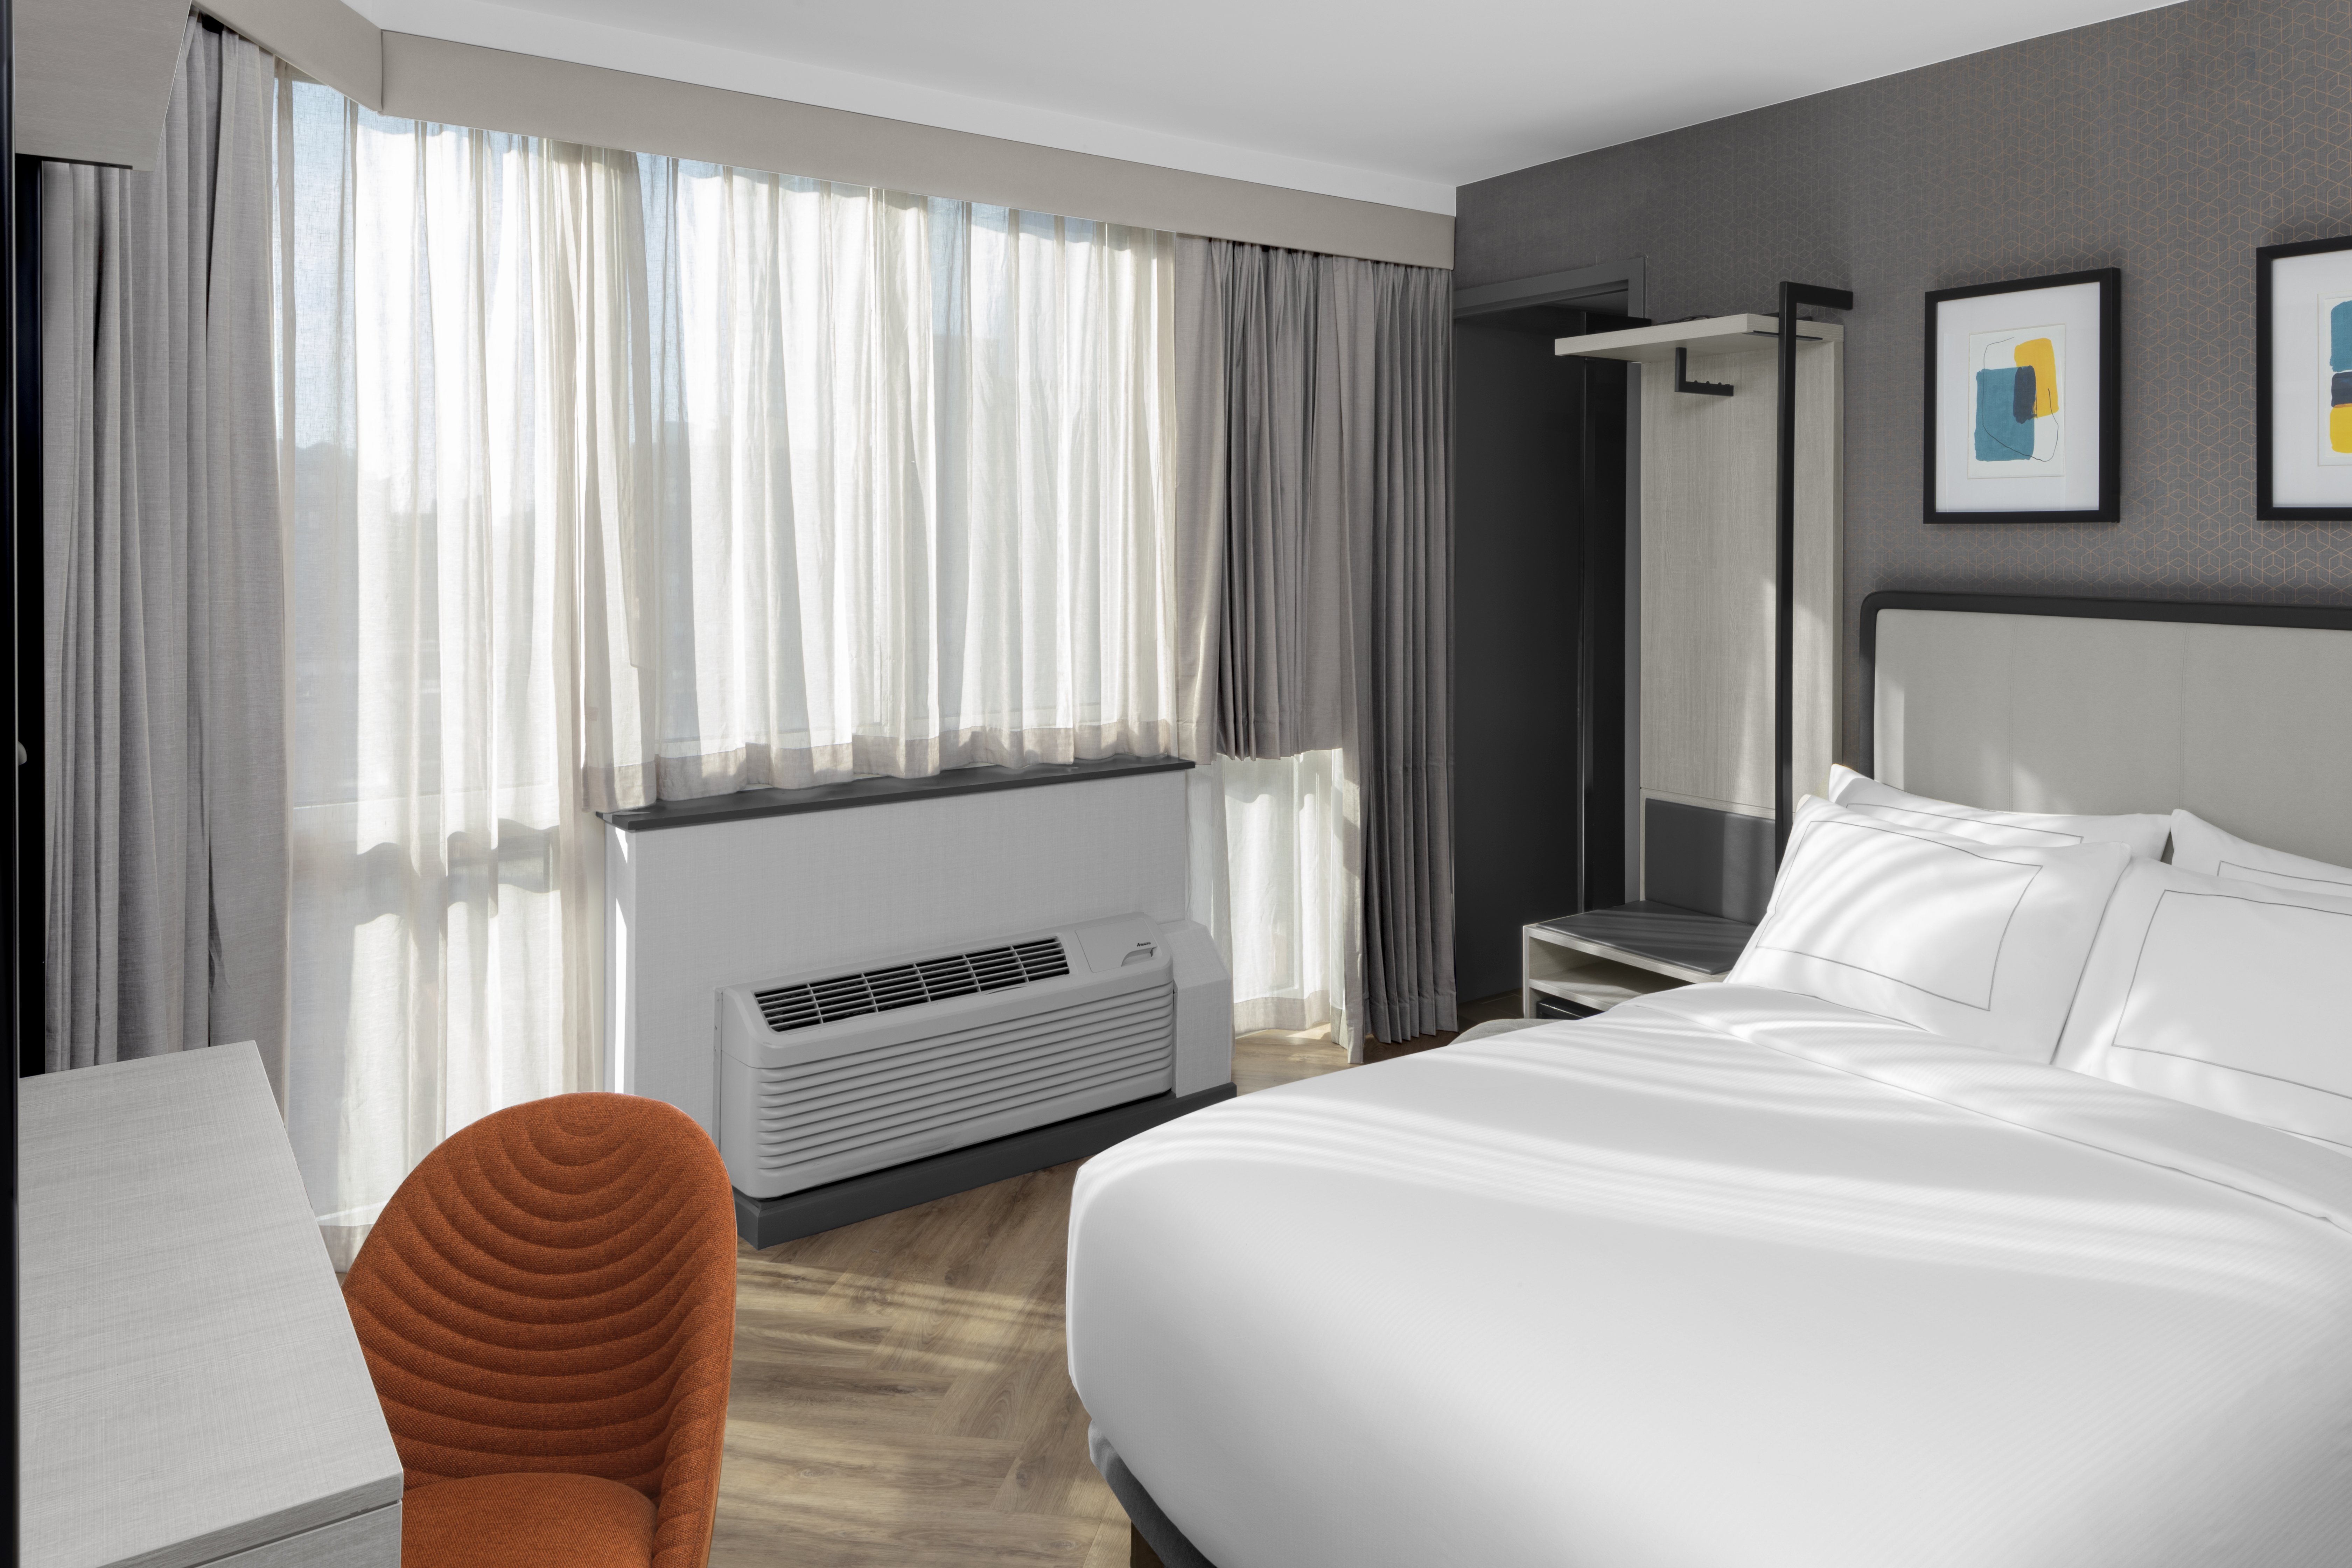 All guest rooms are fully renovated with modern design.